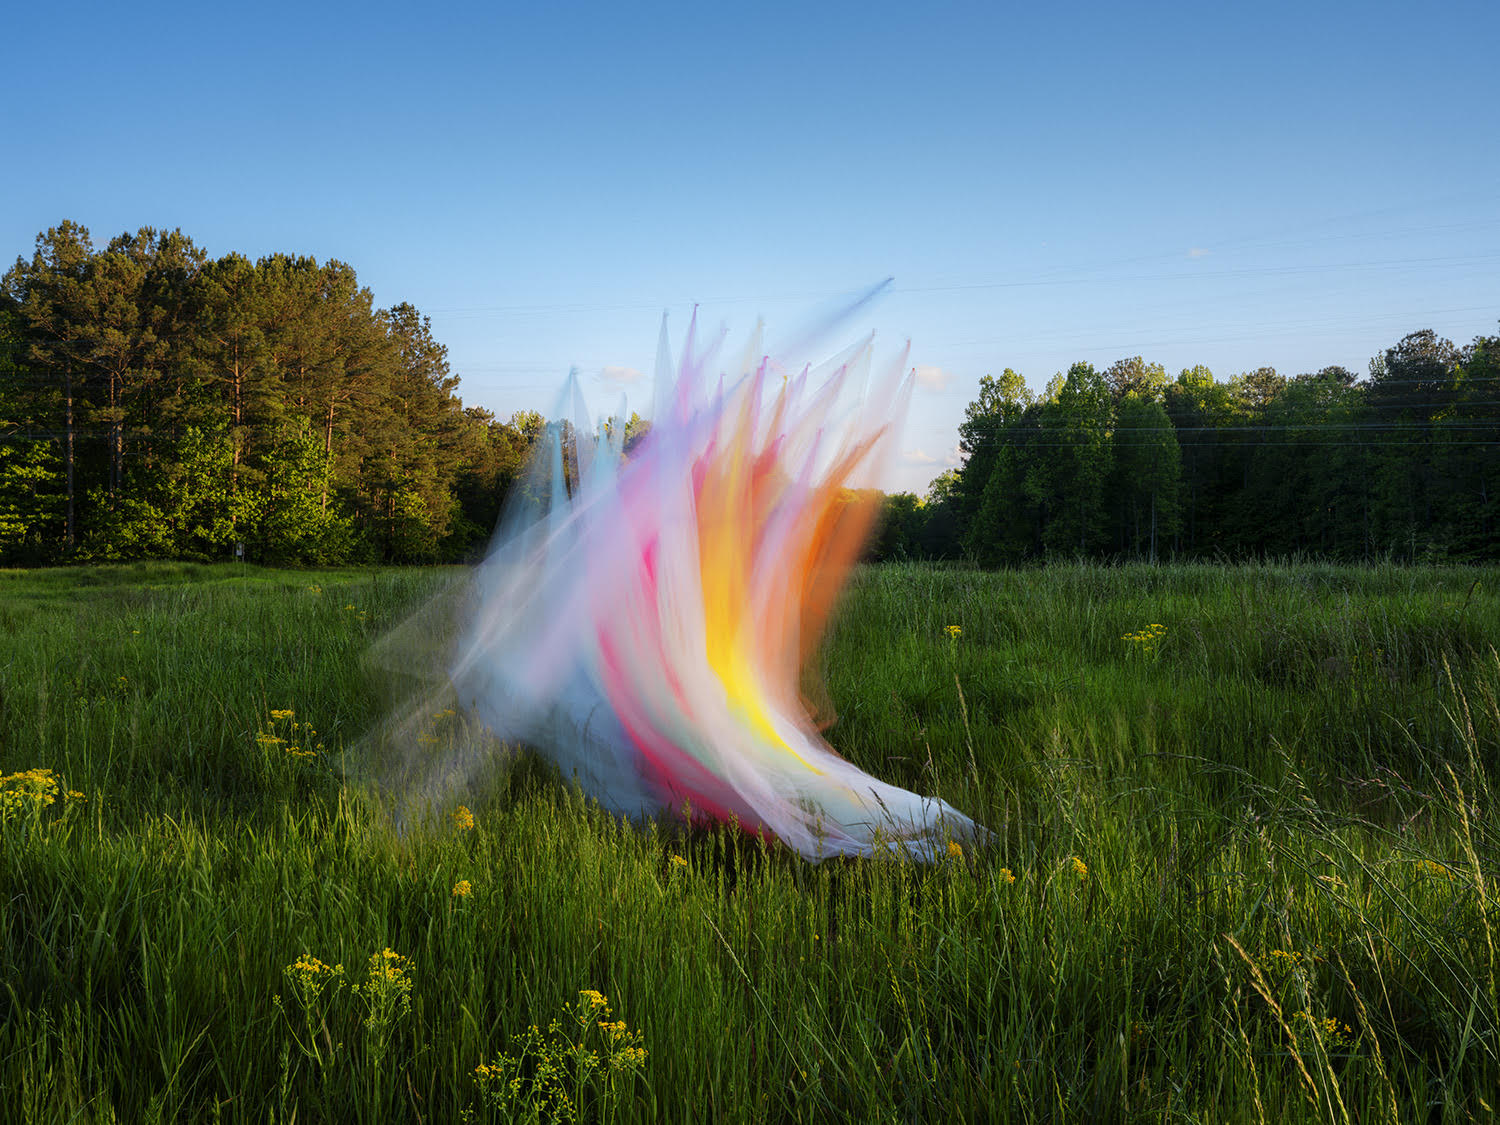 A photograph of a swathe of tulle floating in the wind in a landscape.